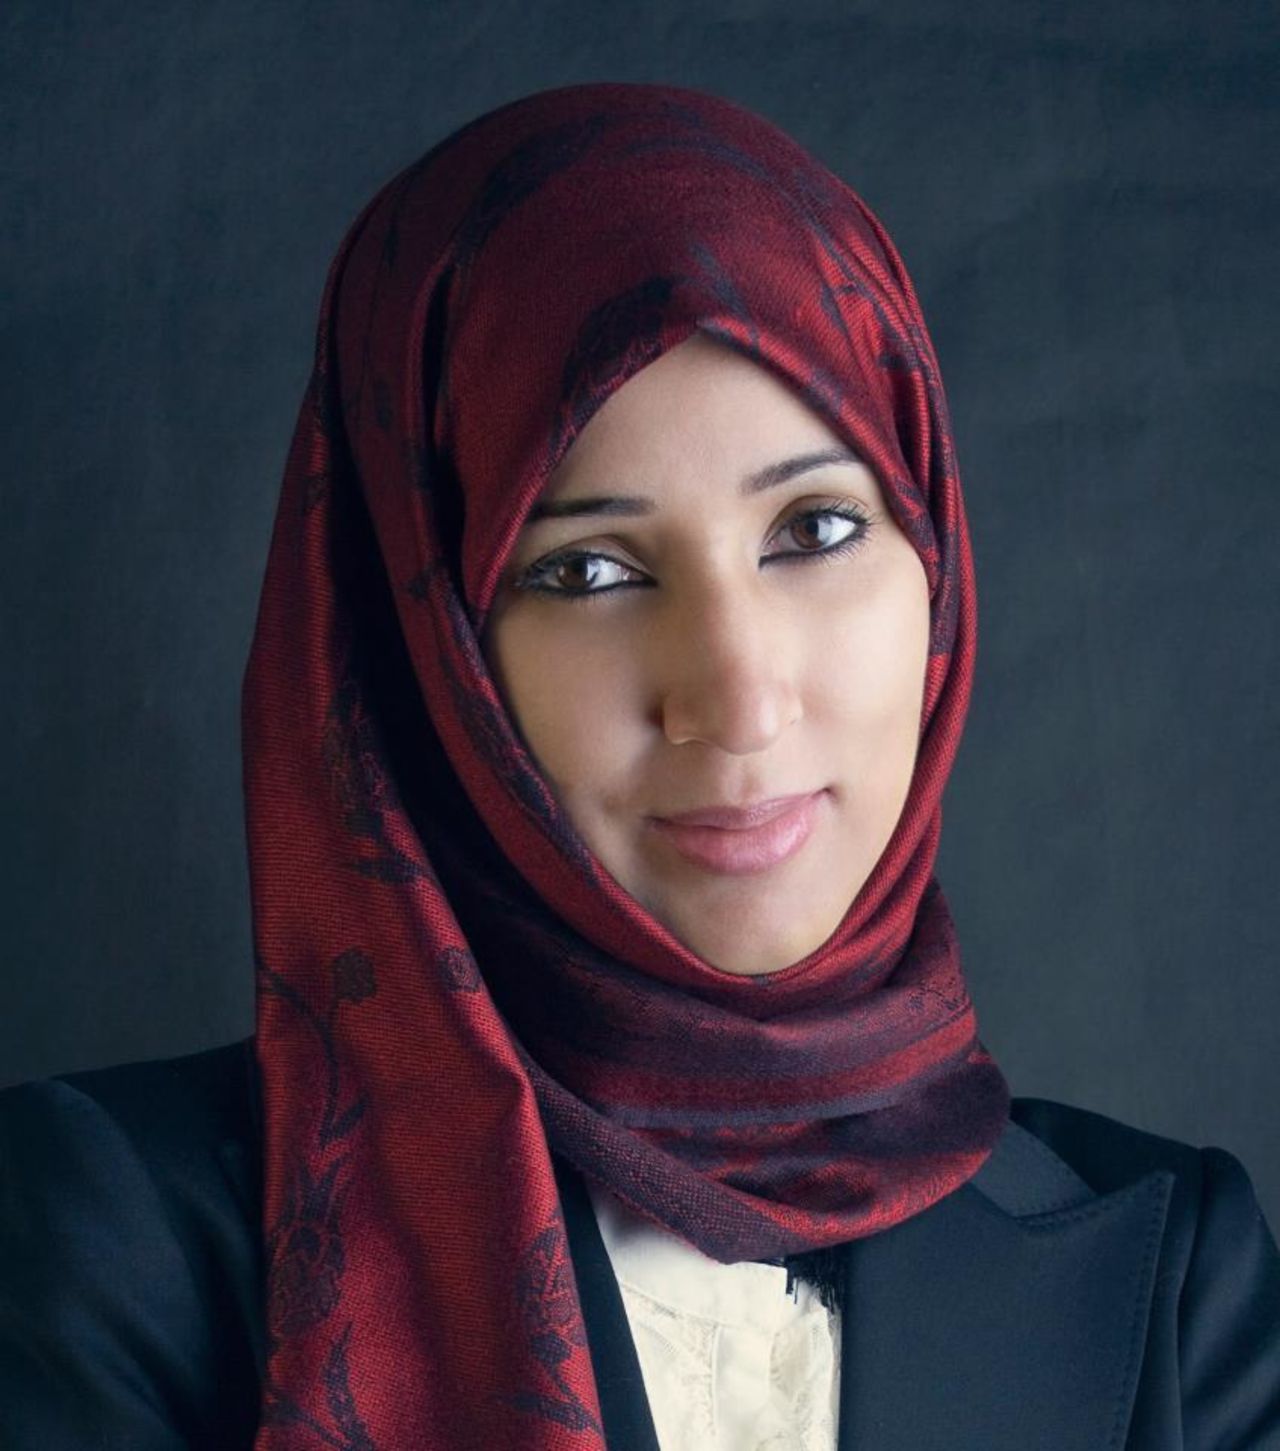 As the "Arab Spring" movement has spread over the Middle East, women are seeing the promise of change and the ability to take part and affect that change.  Here we feature eight women who will likely continue to influence those changes.  Manal al Sharif spearheaded the "#Women2Drive" movement in Saudi Arabia -- openly defying the country's ban on women driving.